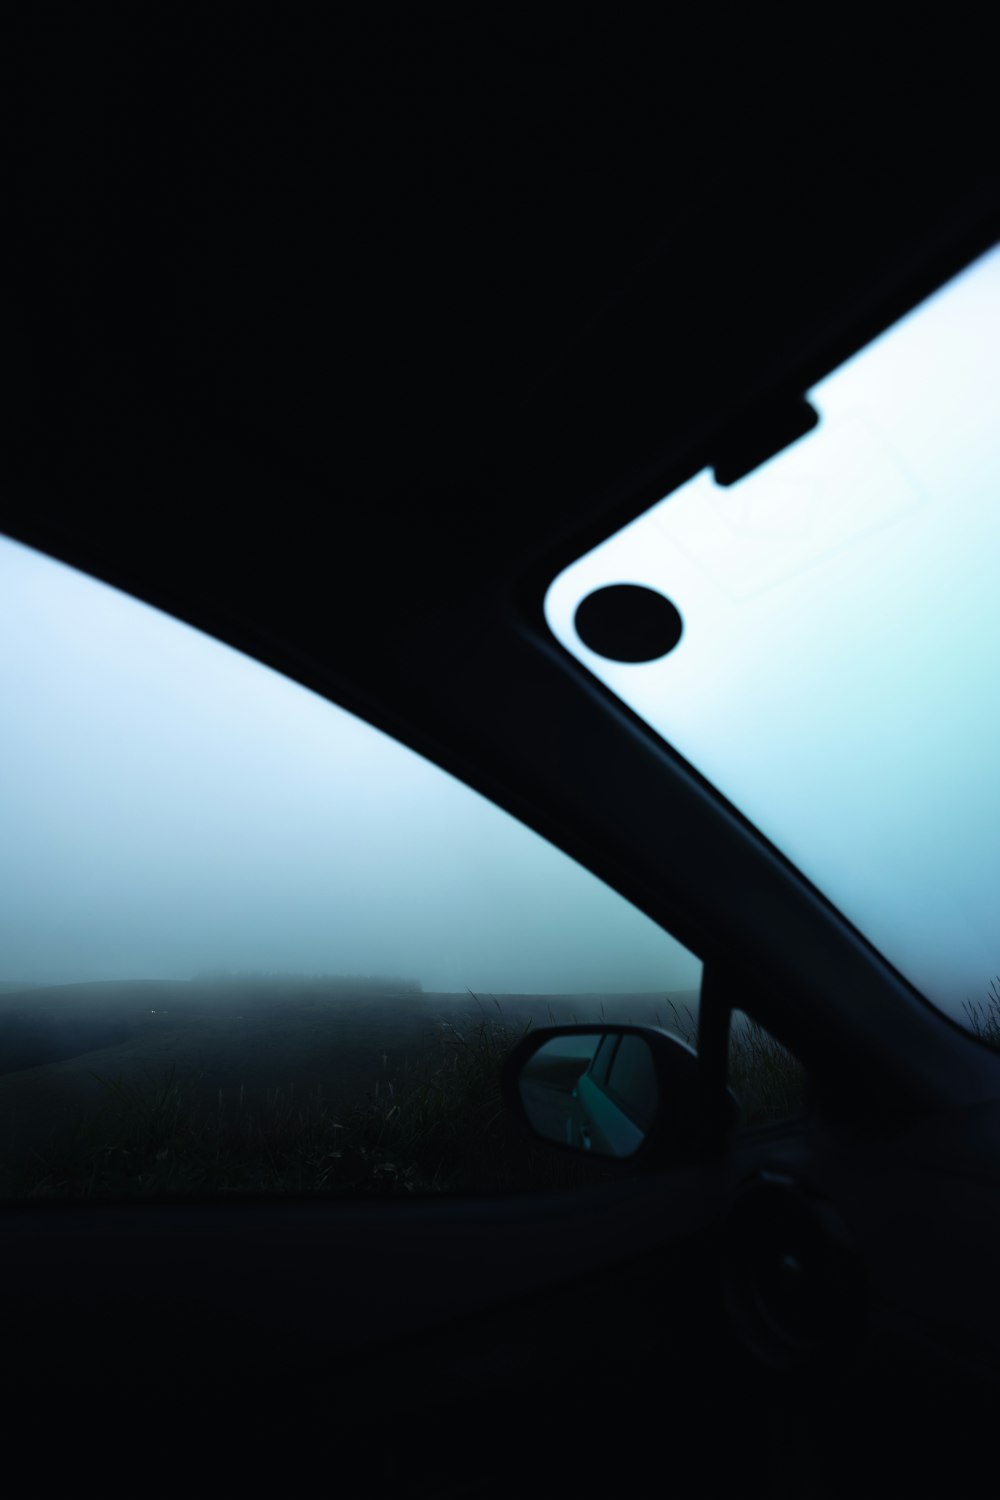 a rear view mirror of a car on a foggy day